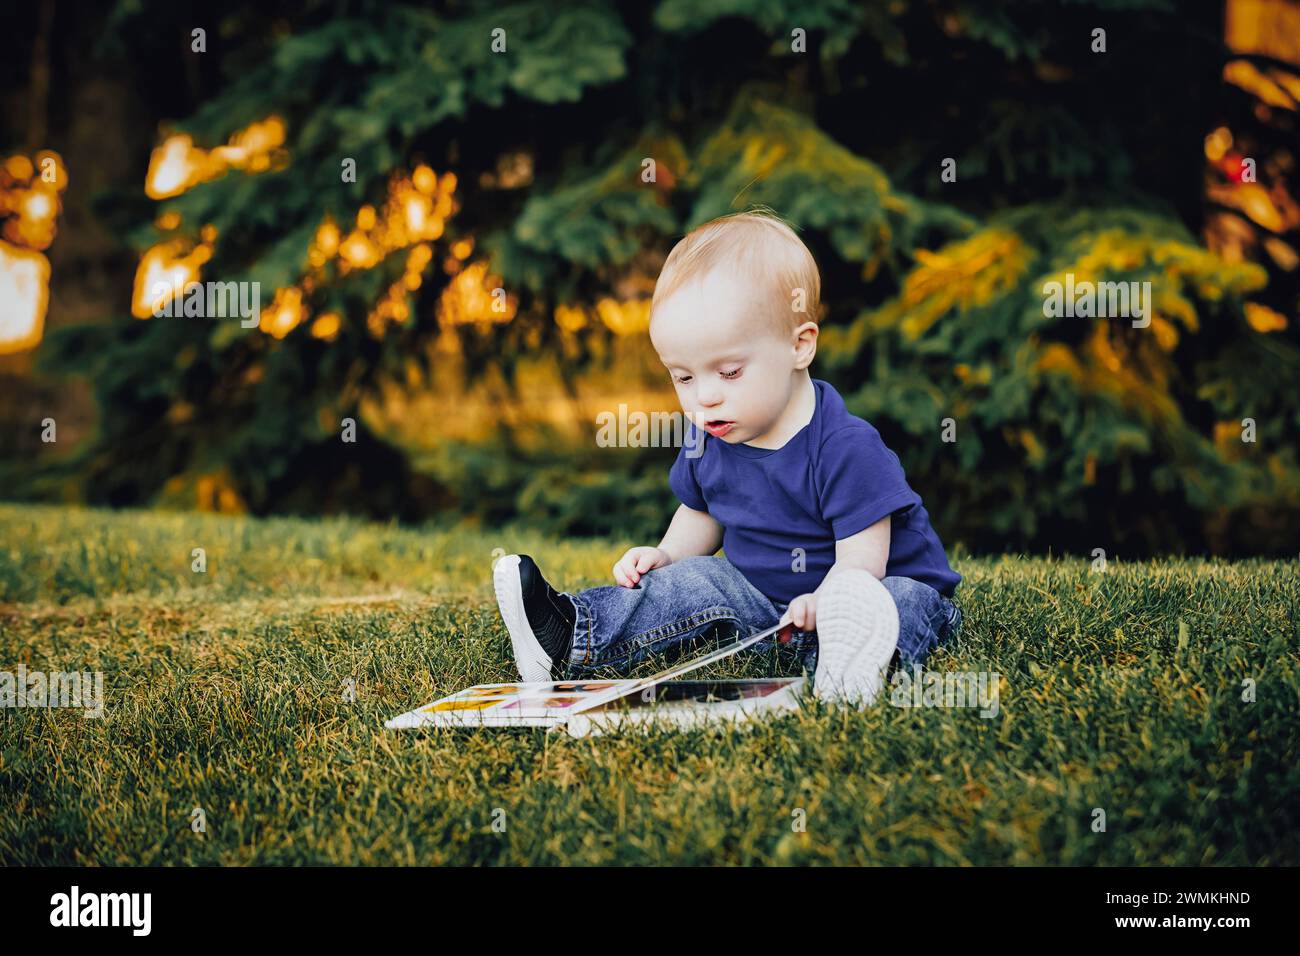 Baby boy with Down syndrome sitting on grass in a city park and looking at a book during a warm fall afternoon; Leduc, Alberta, Canada Stock Photo